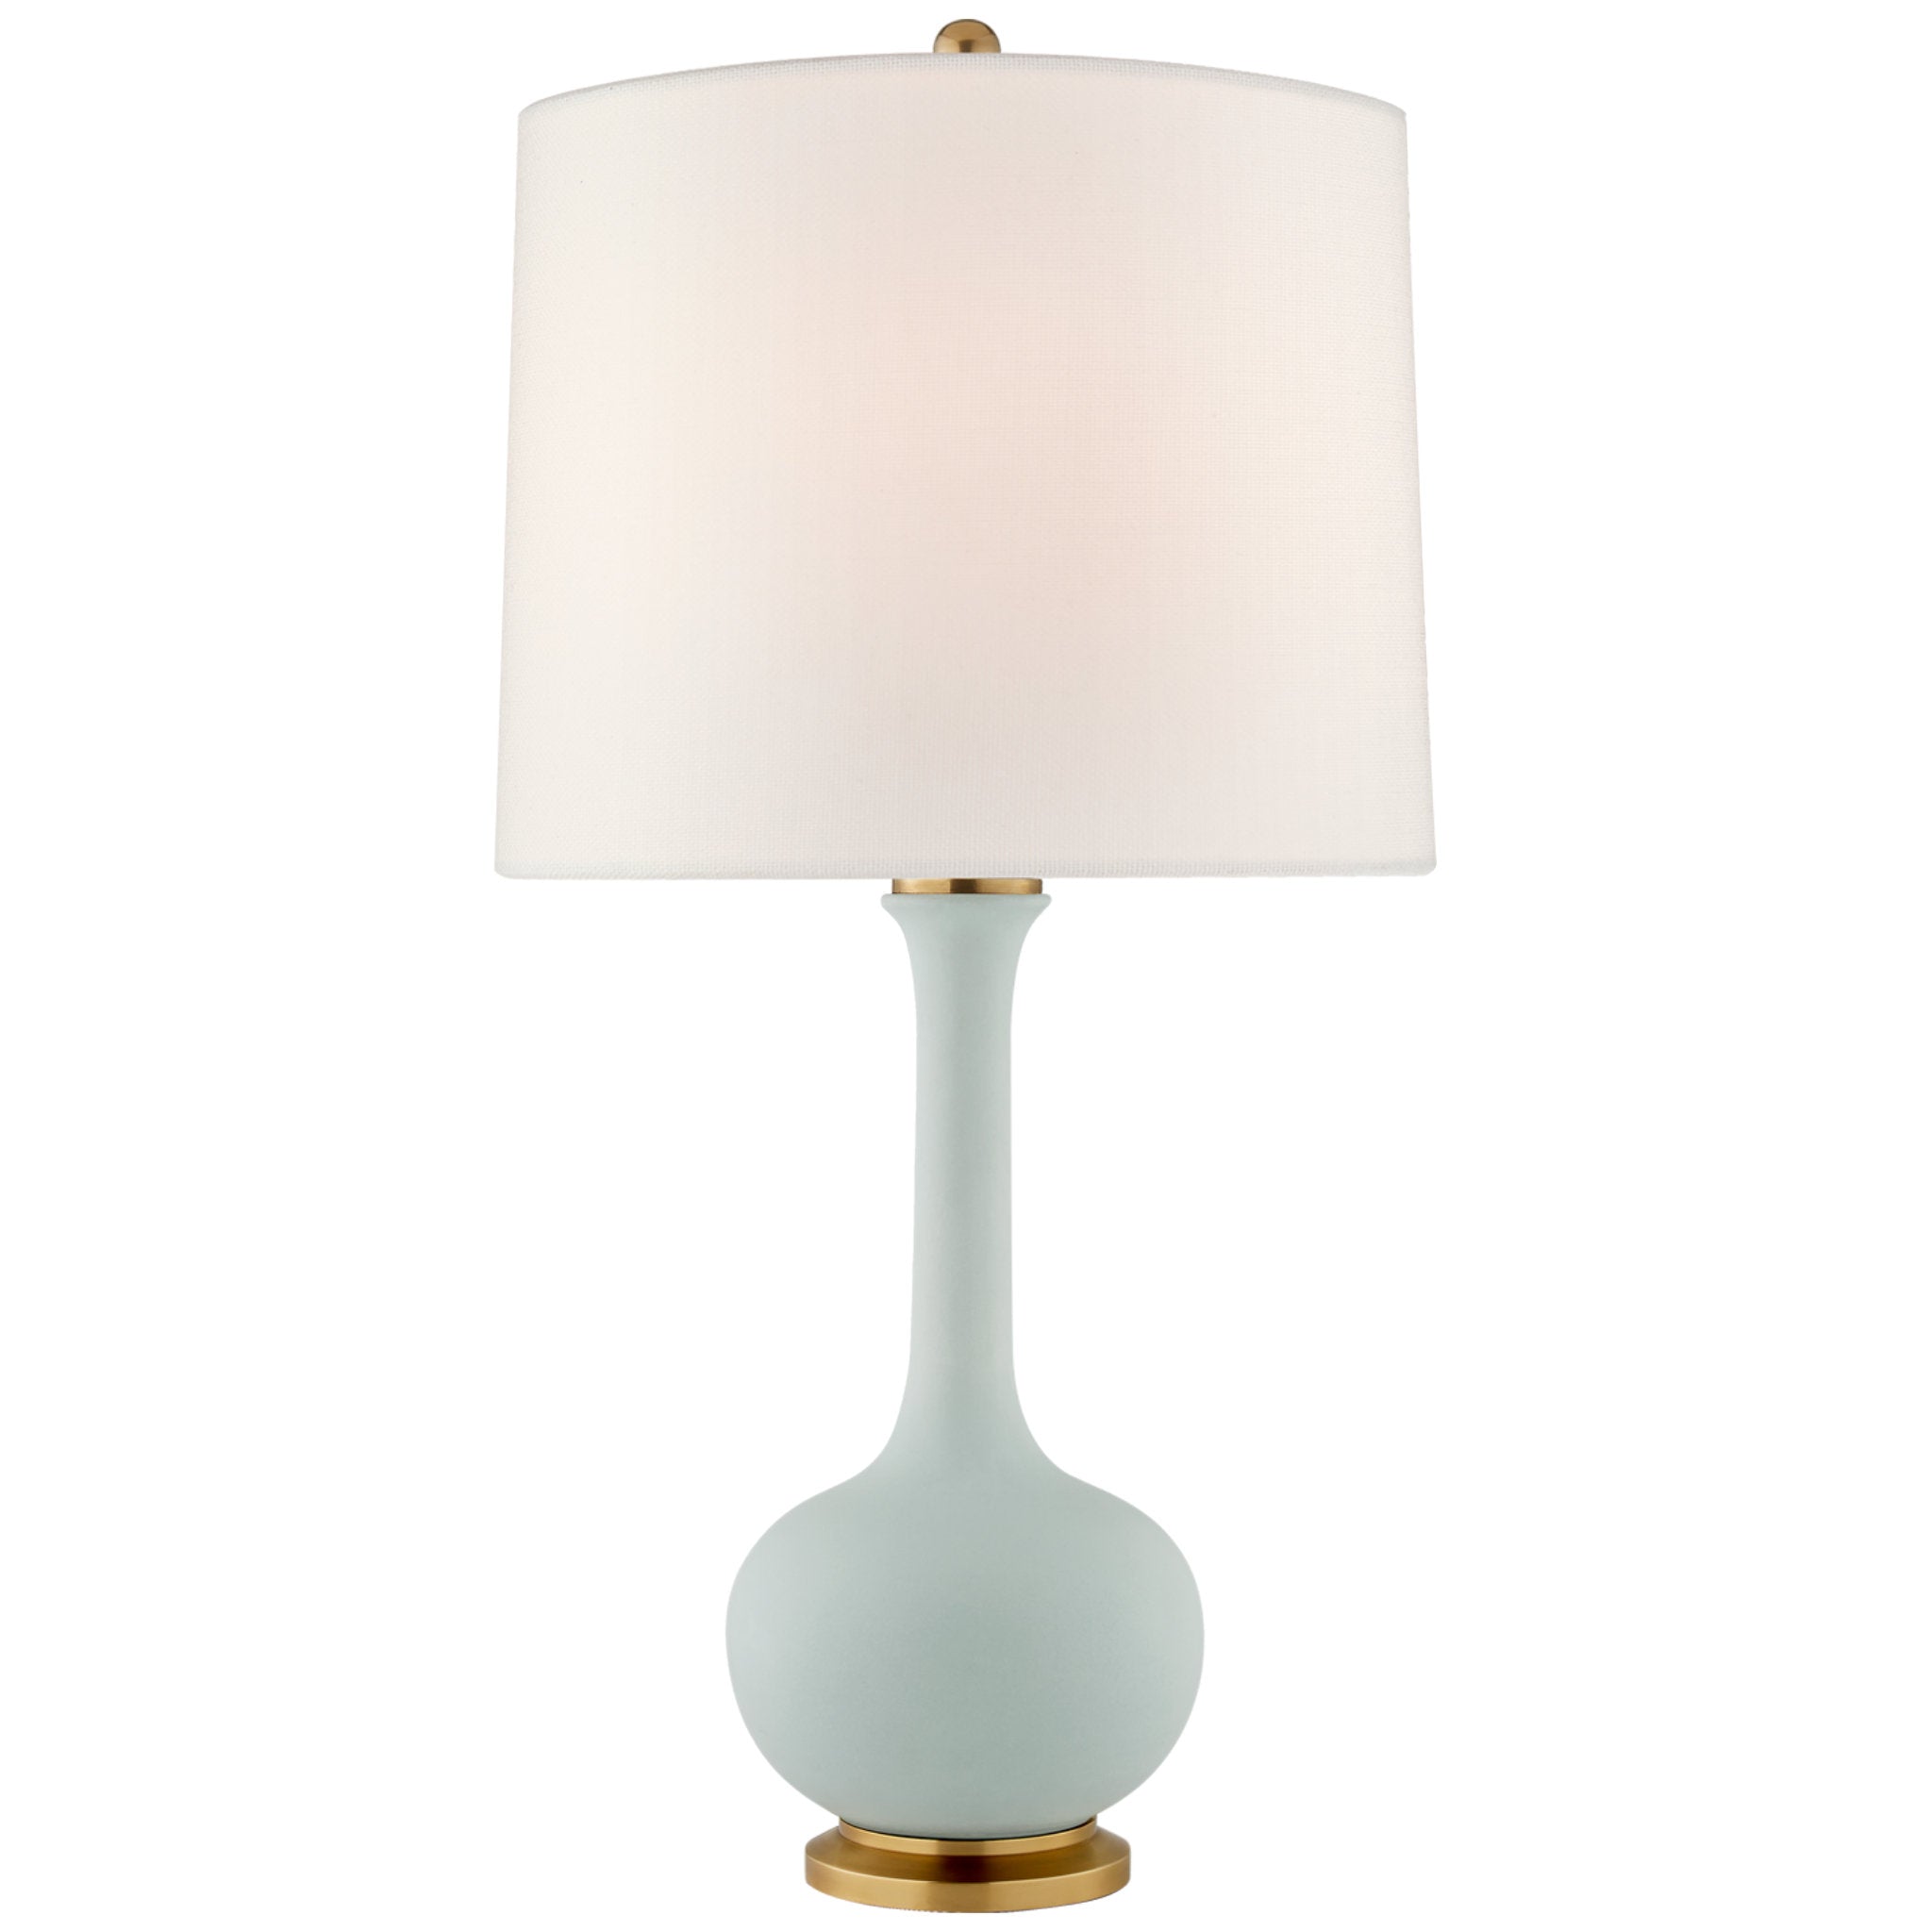 Christopher Spitzmiller Coy Medium Table Lamp in Matte Sky Blue with Linen Shade